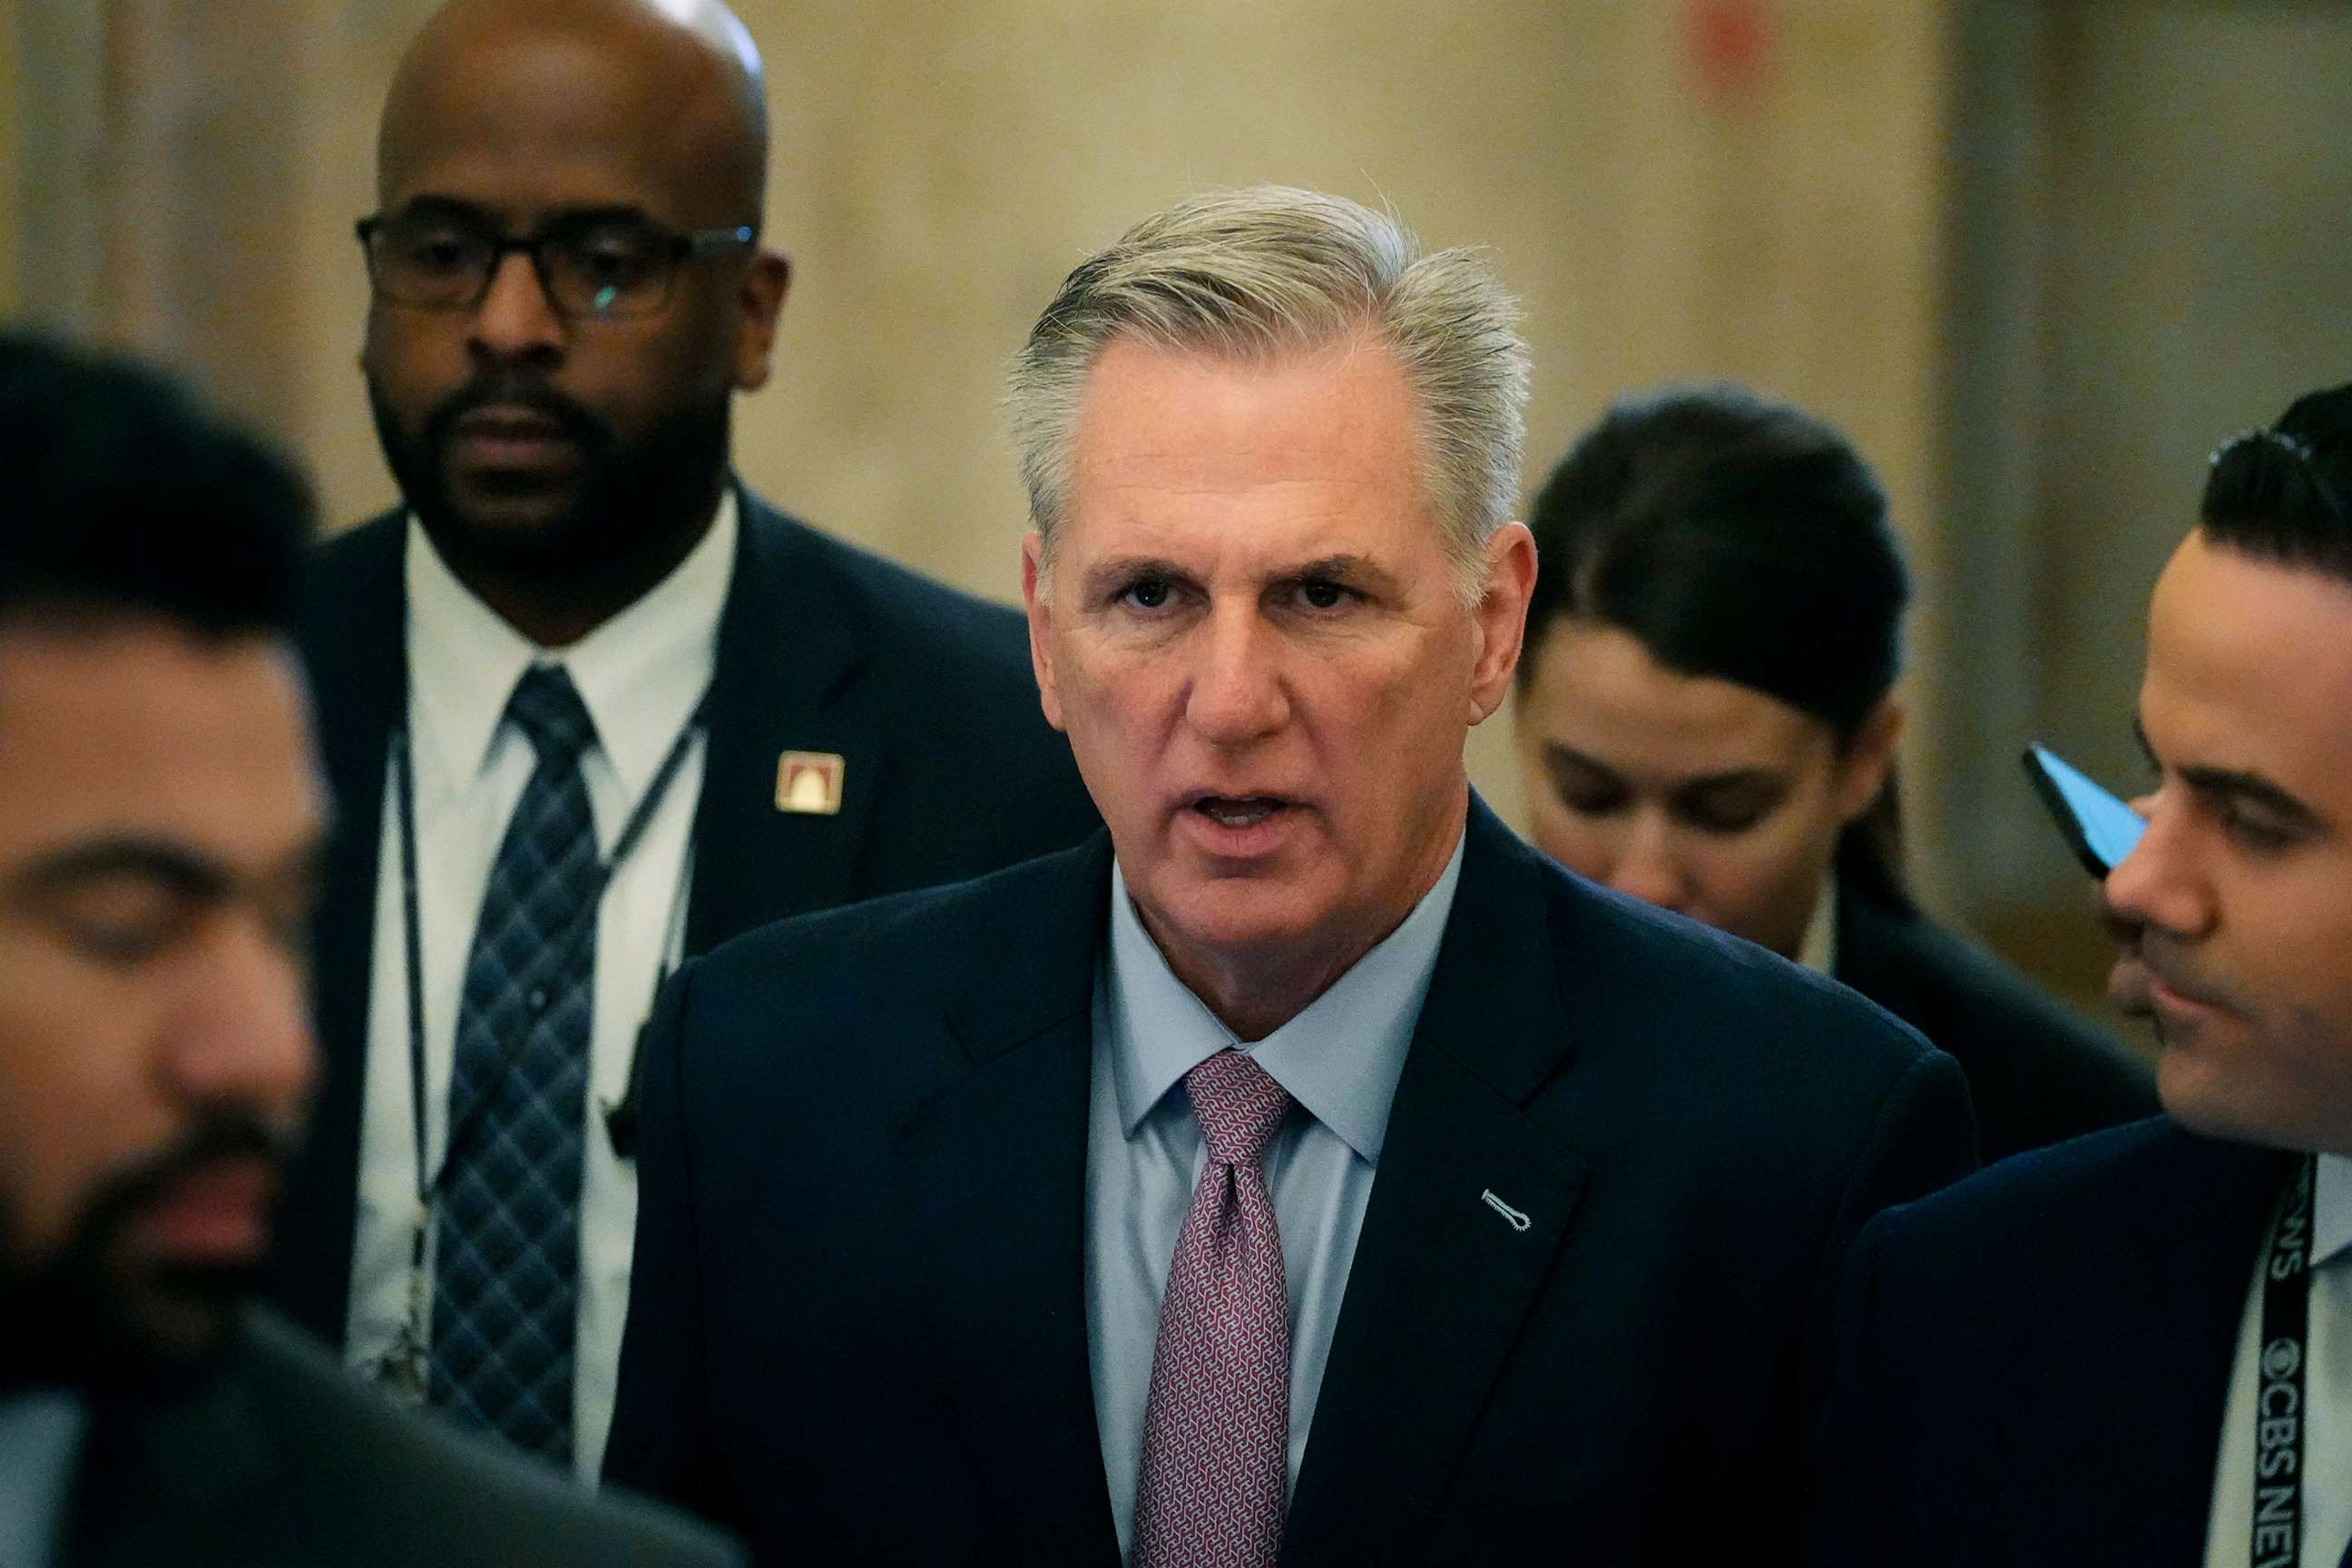 PHOTO: House Republican leader Kevin McCarthy arrives as the U.S. Capitol for the fourth day of the House's attempts to elect a speaker and convene the 118th Congress in Washington, Jan. 6, 2023.